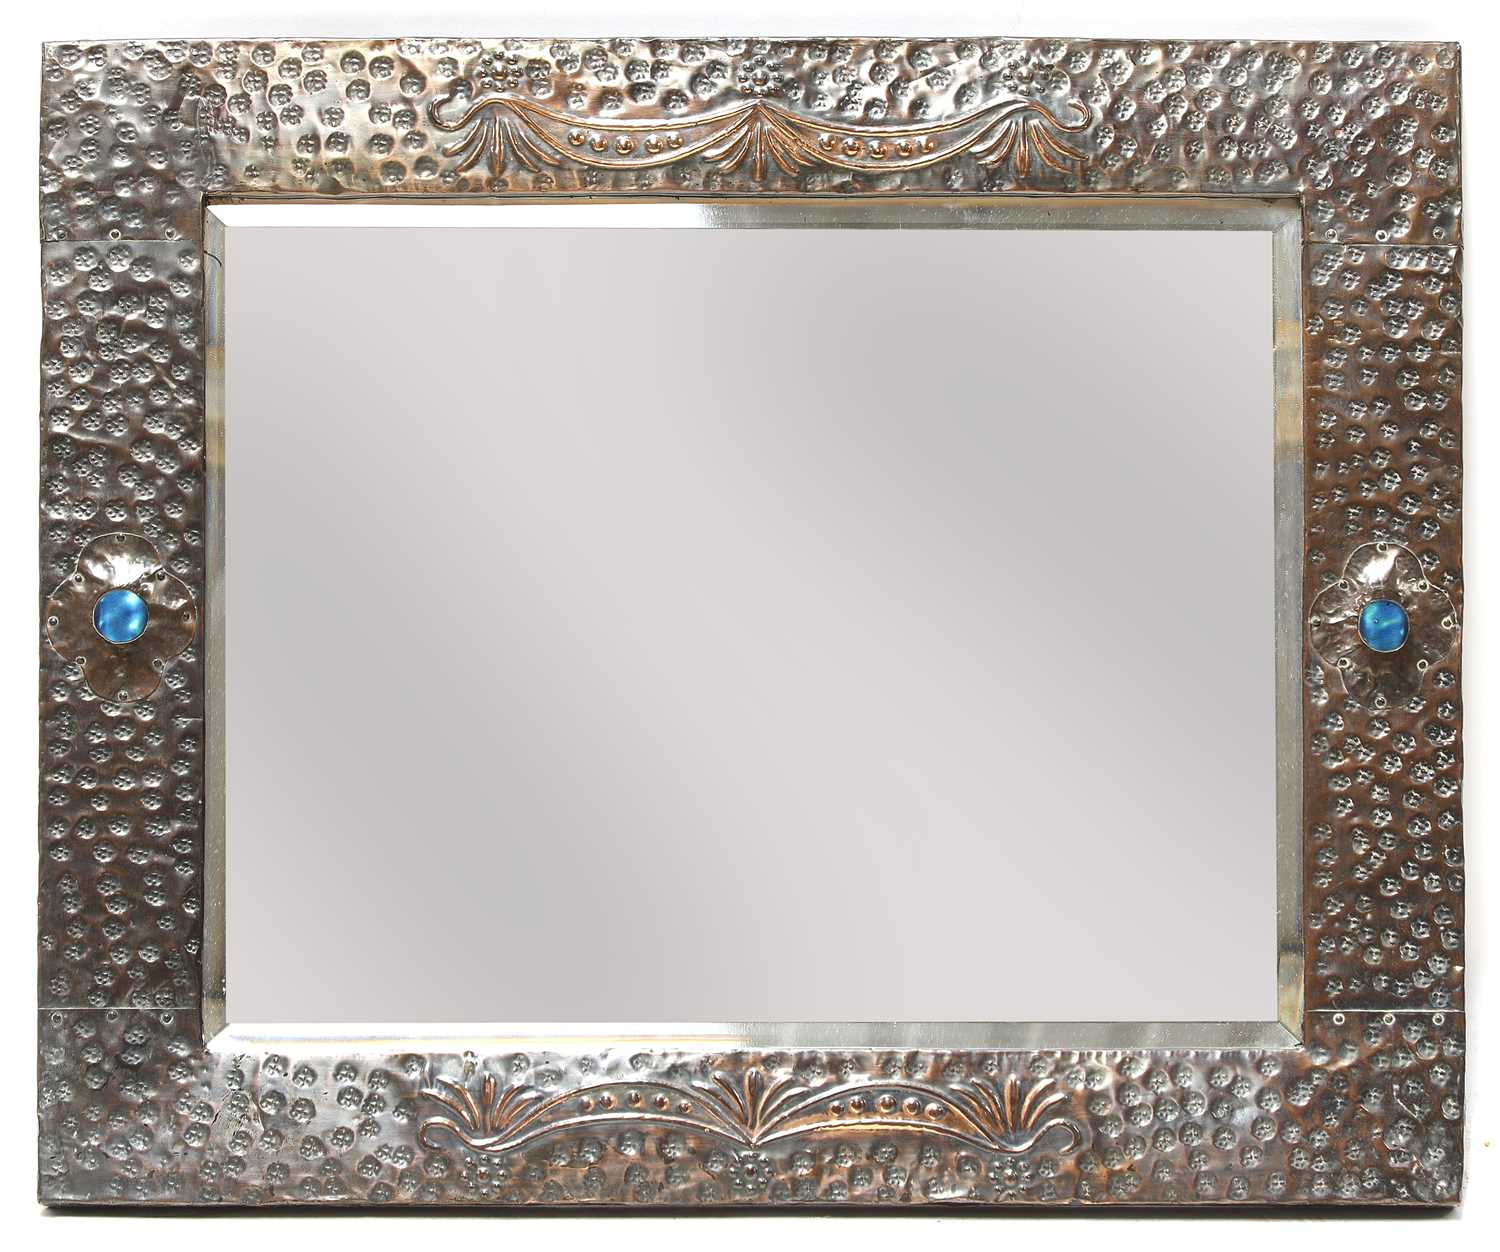 Lot 69 - An Arts and Crafts embossed copper mirror